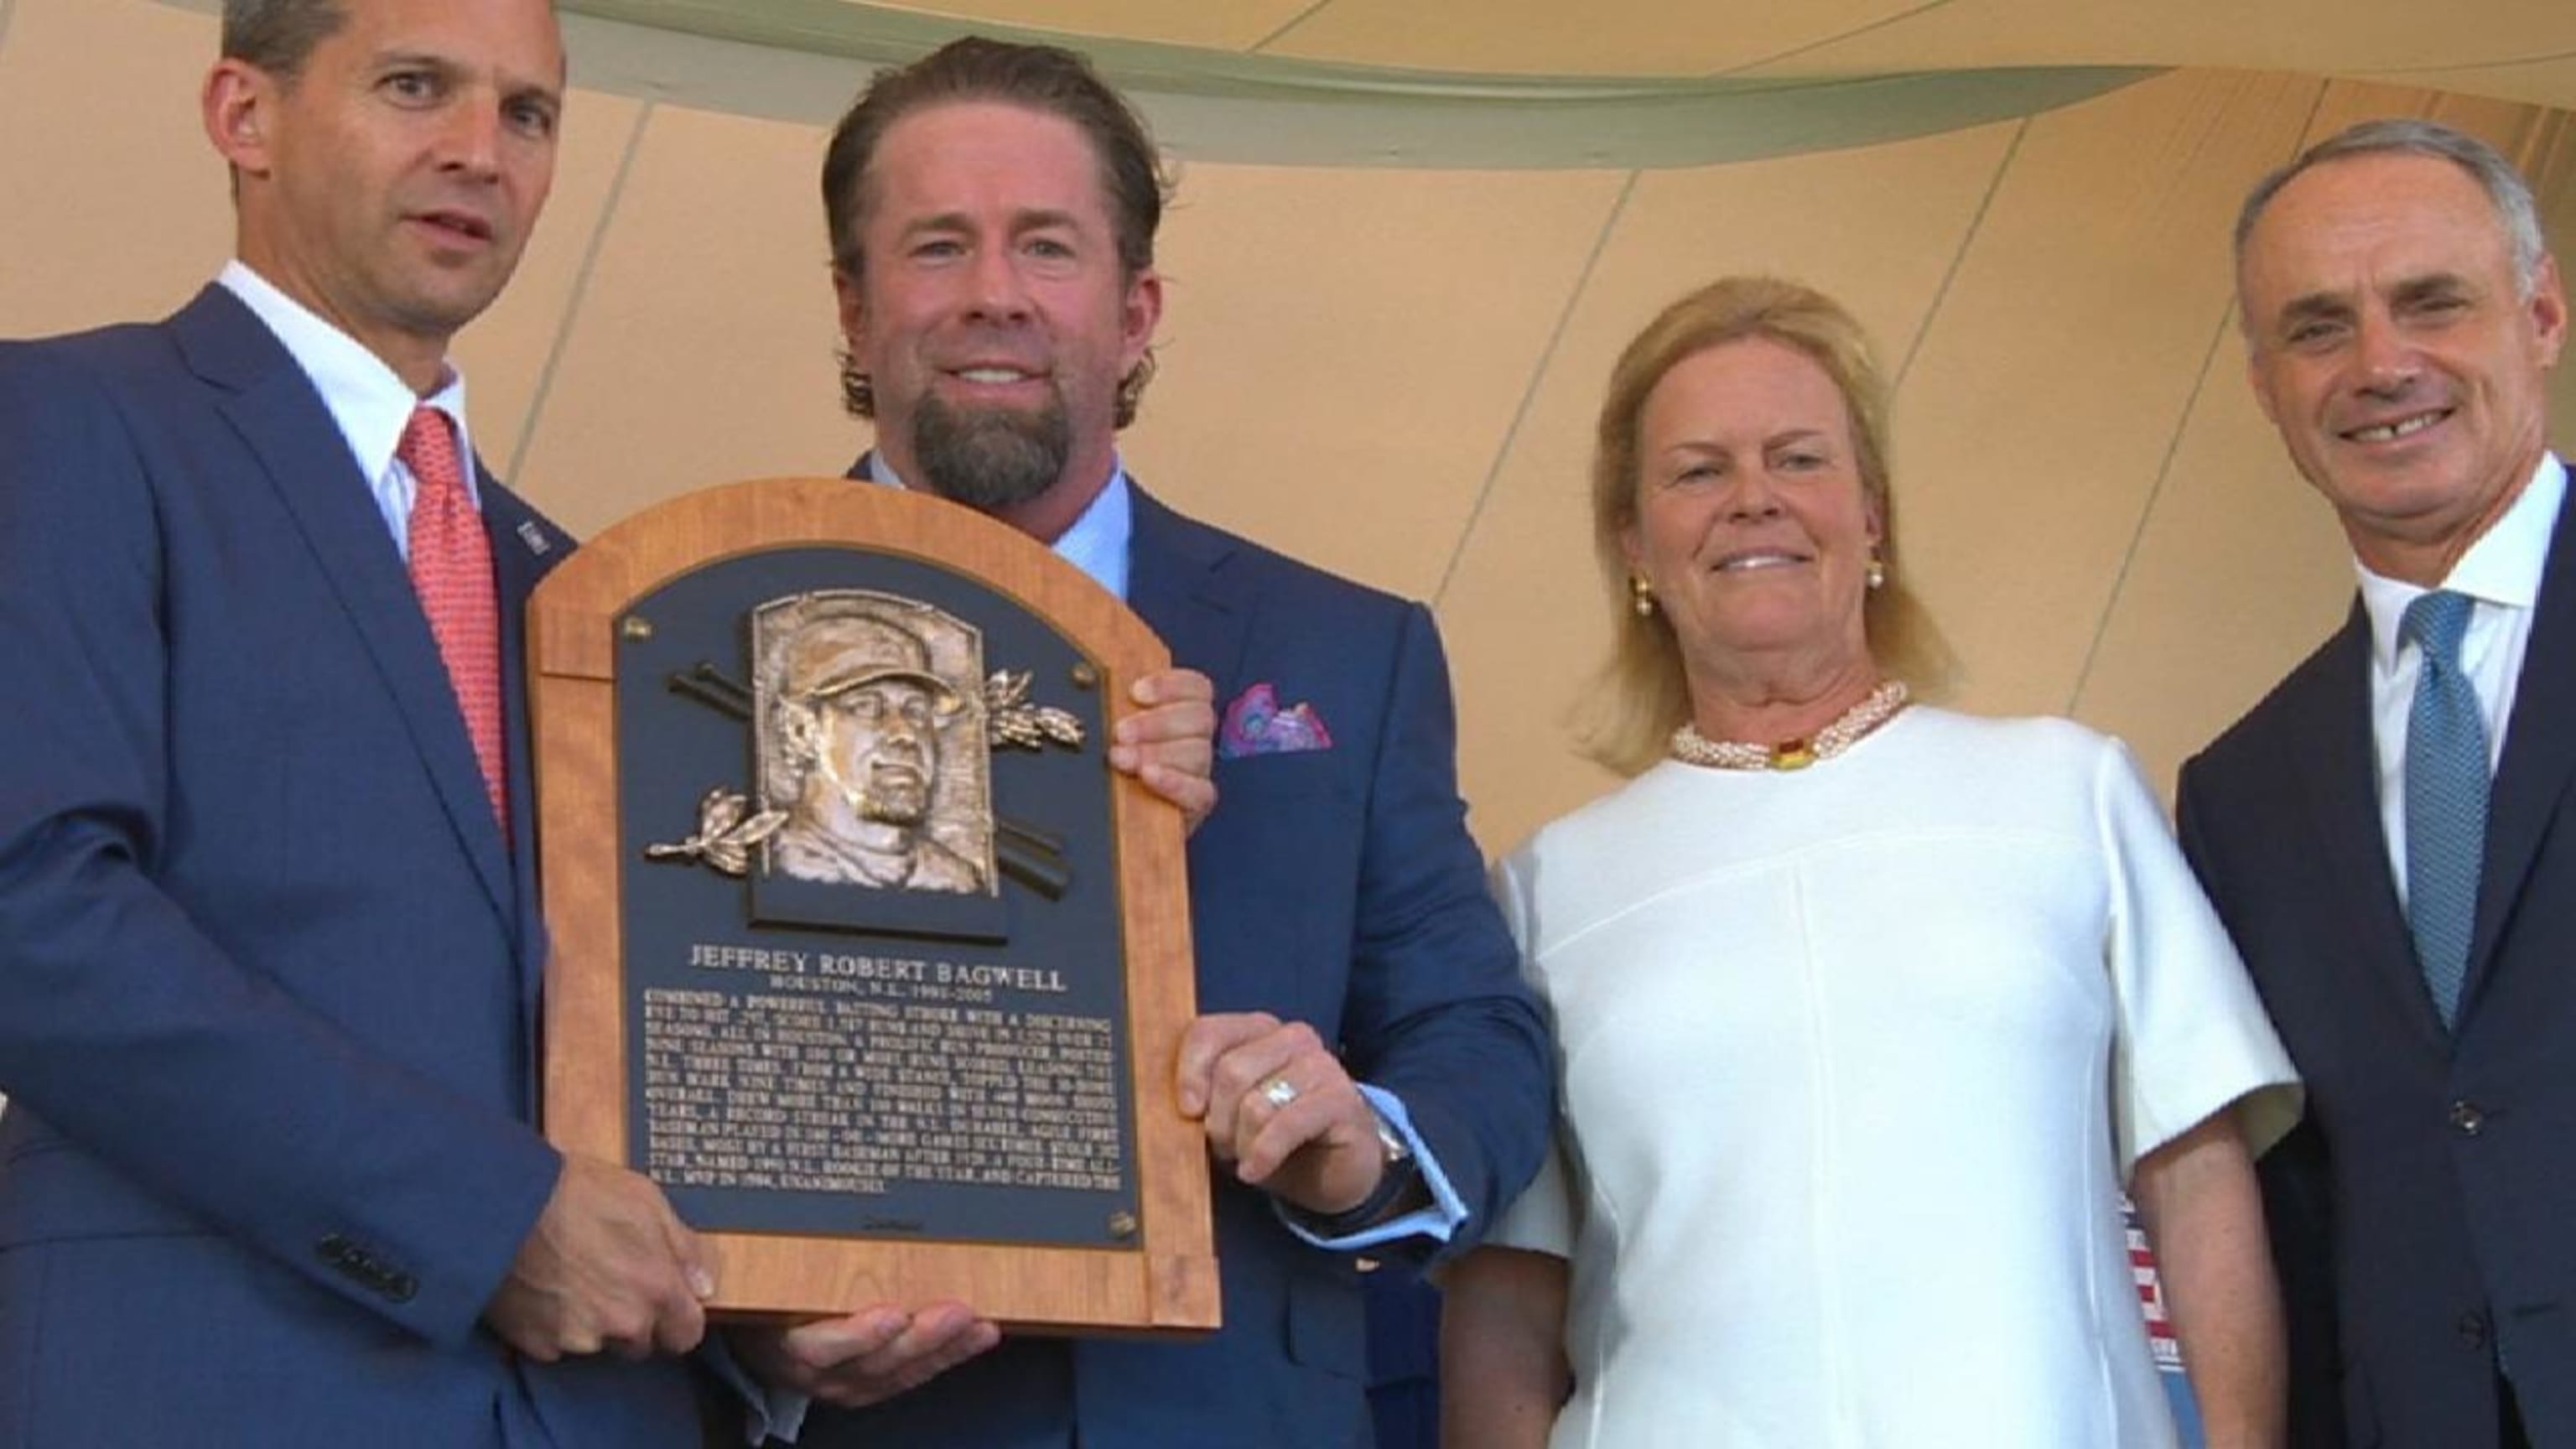 Connecticut's Jeff Bagwell Elected to MLB Hall of Fame